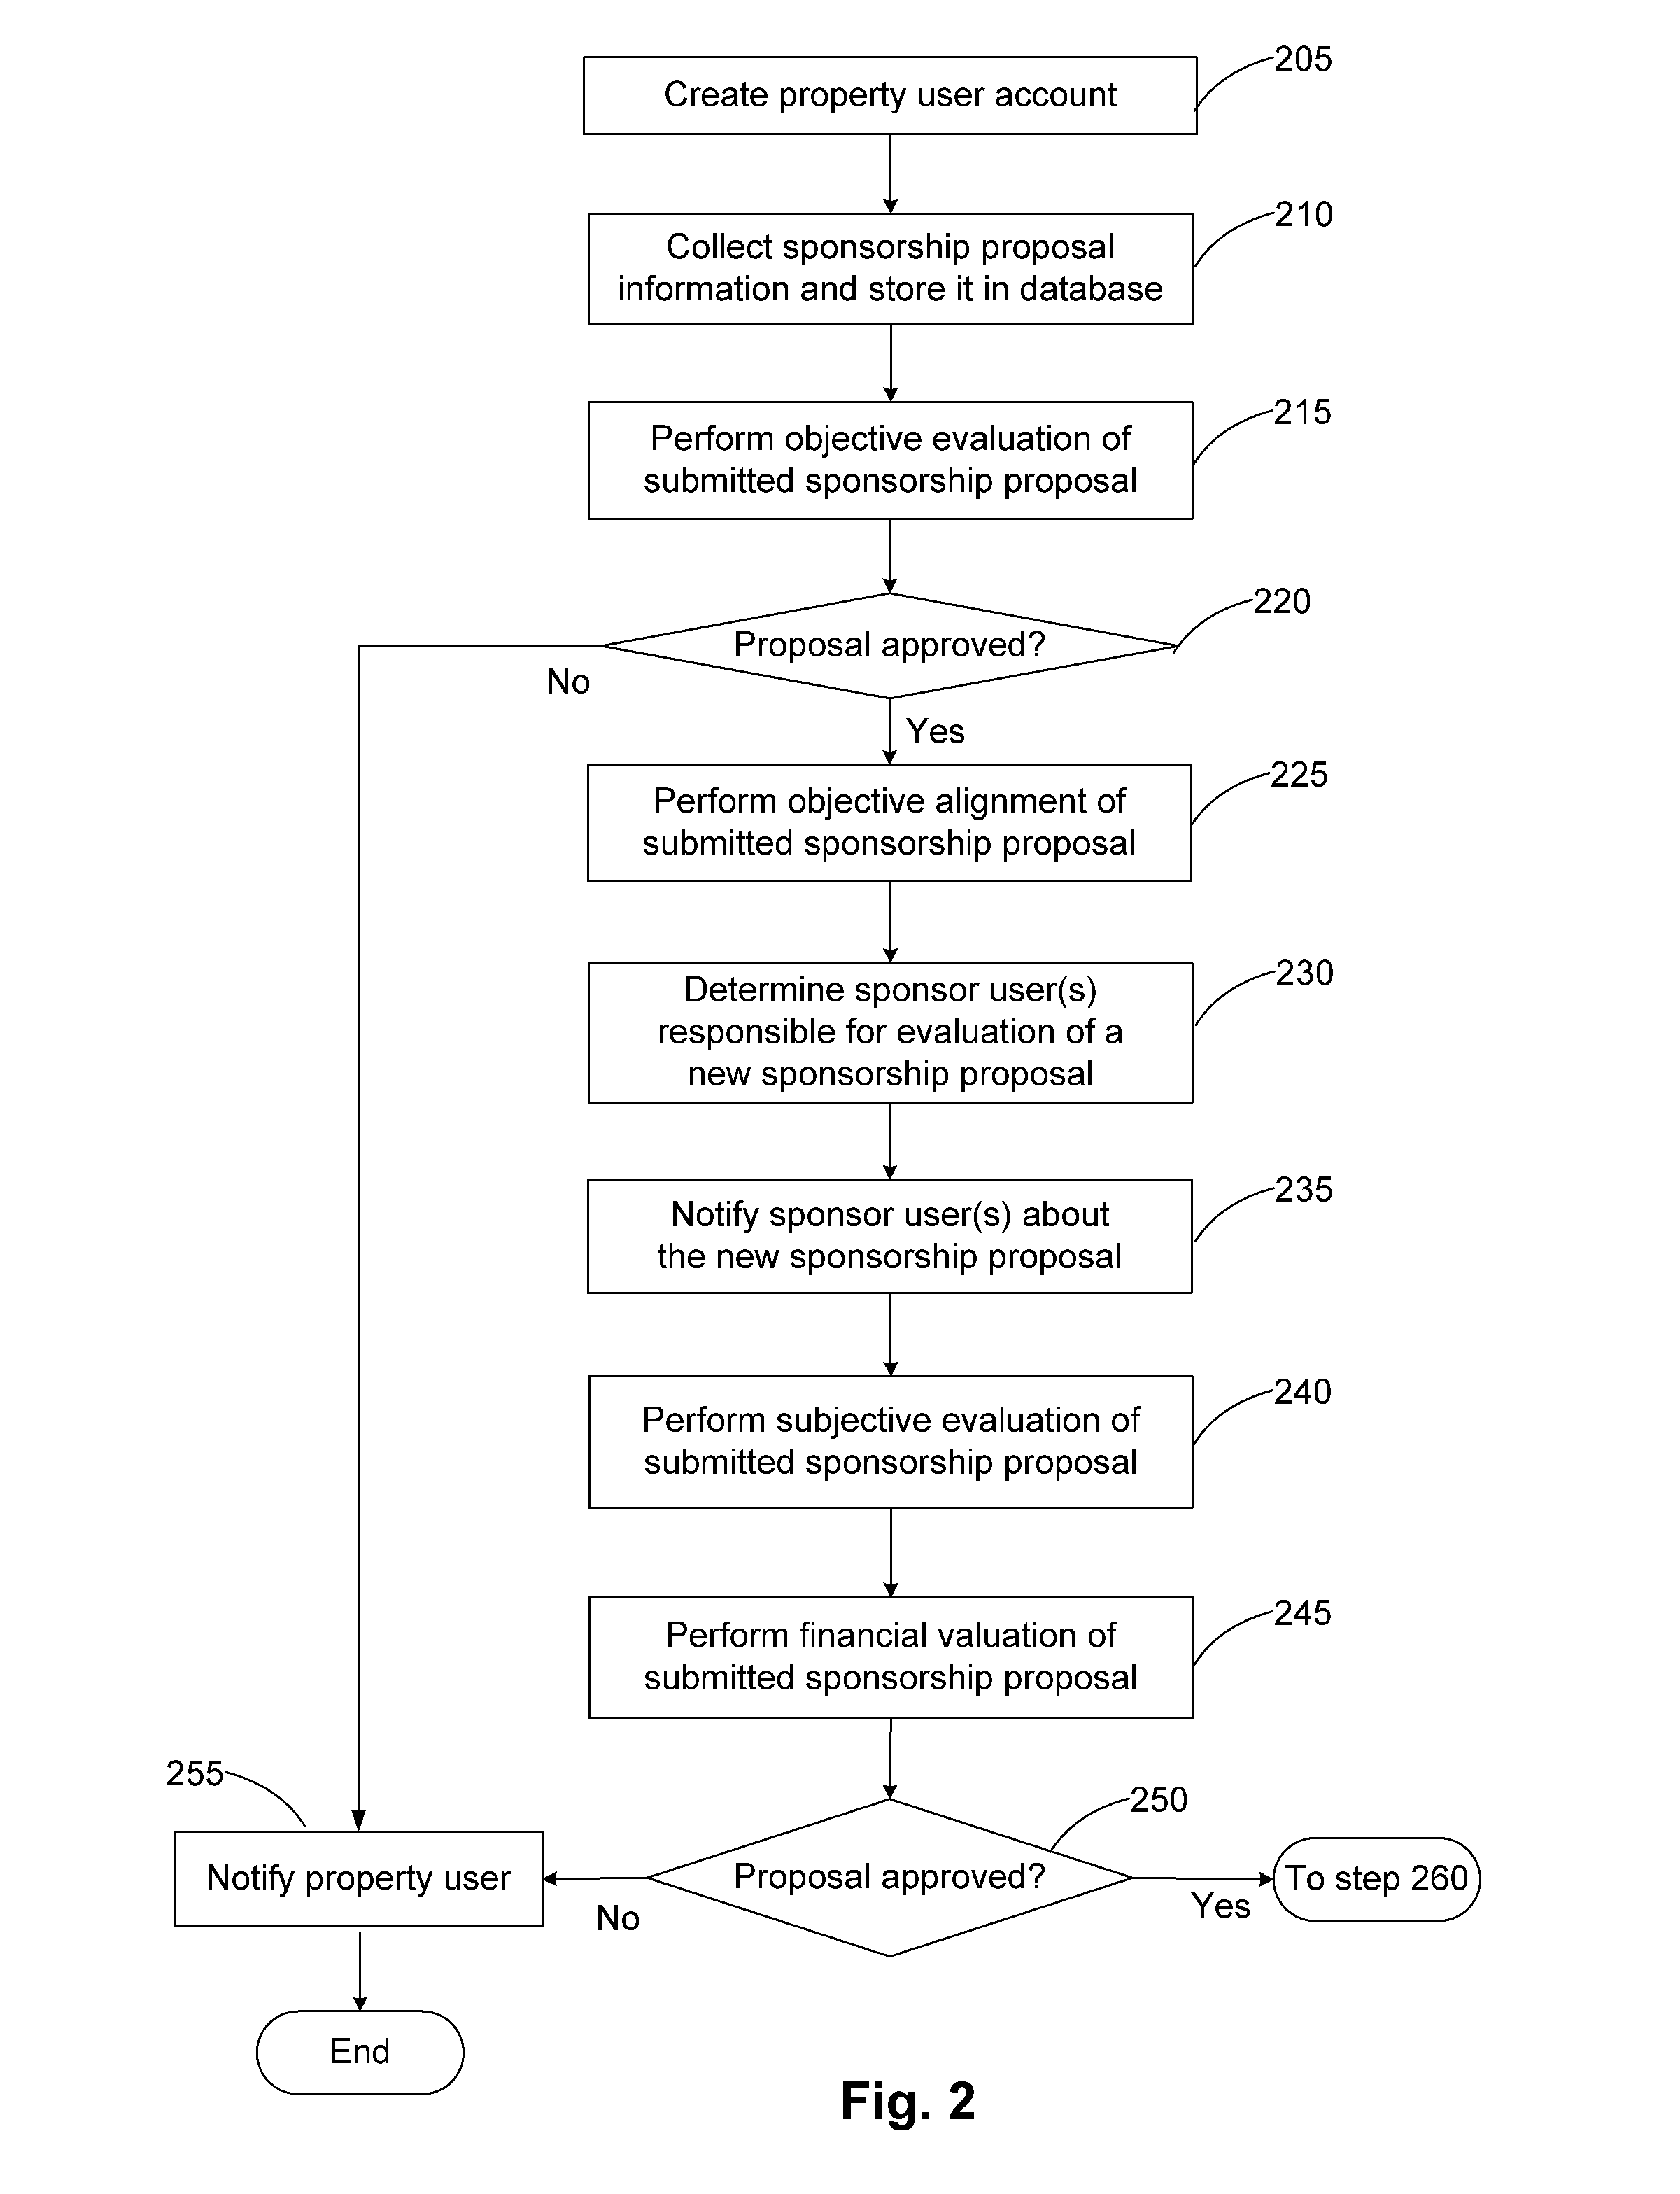 System and Method for Evaluation, Management, and Measurement of Sponsorship